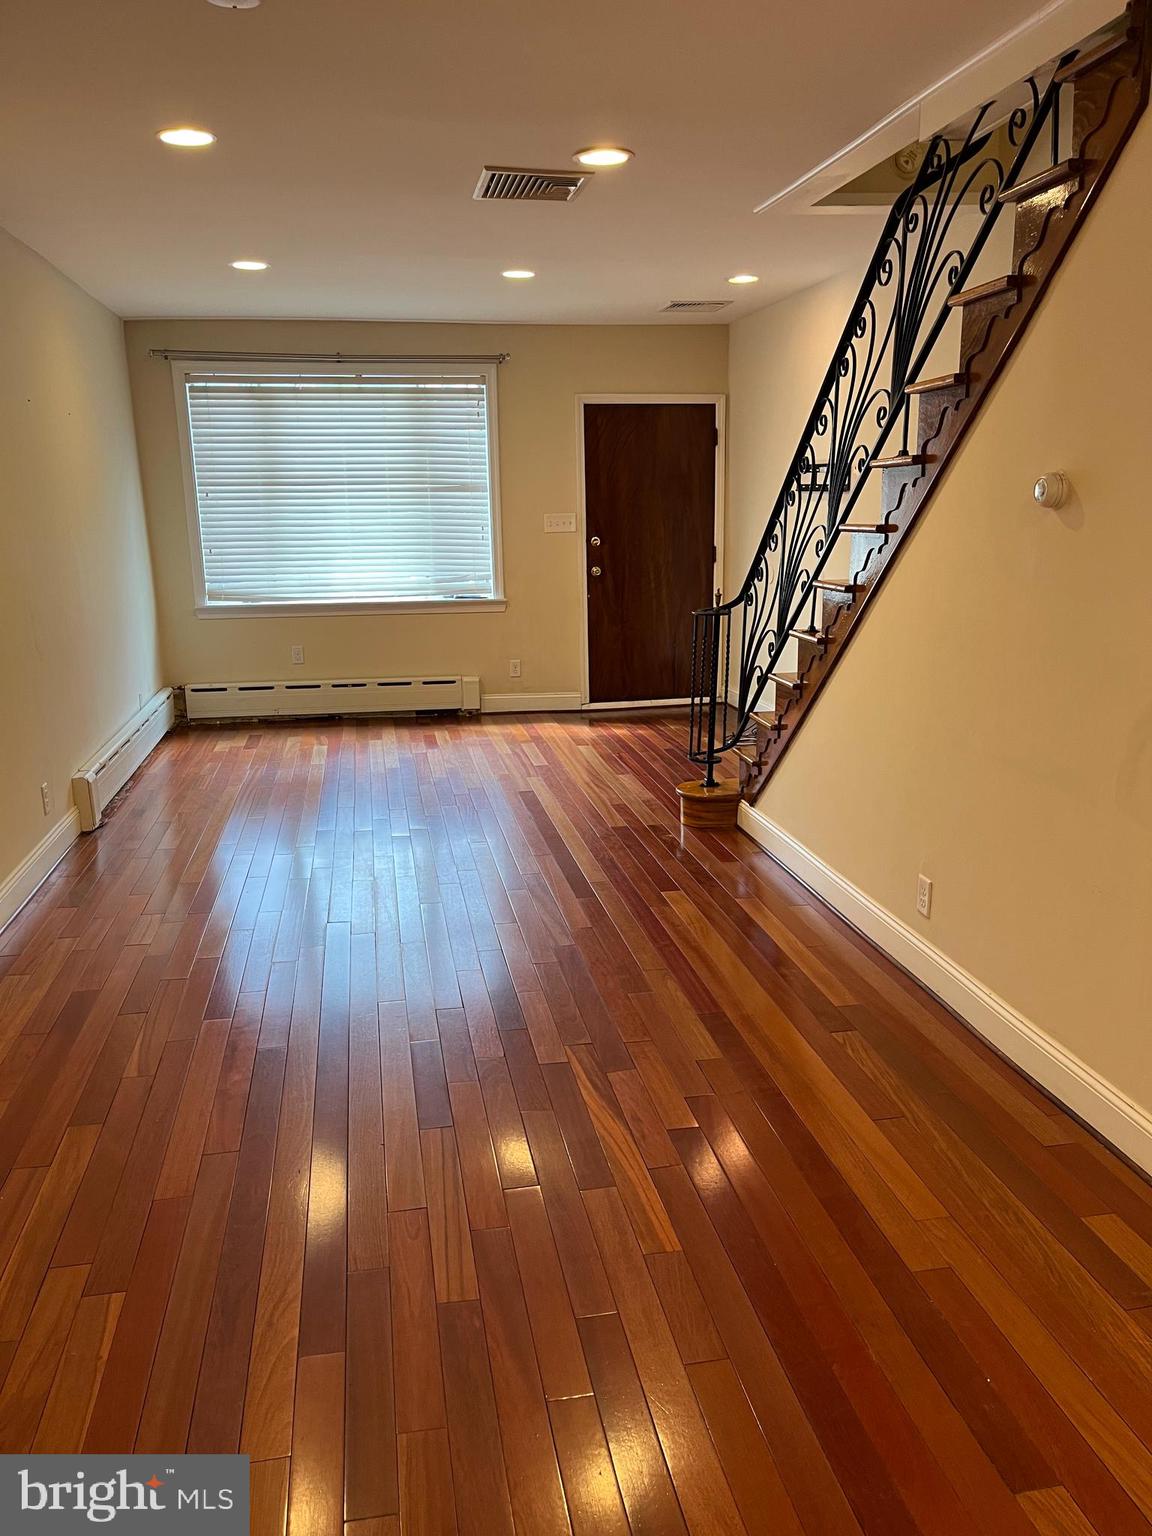 an entryway in a hall with wooden floor